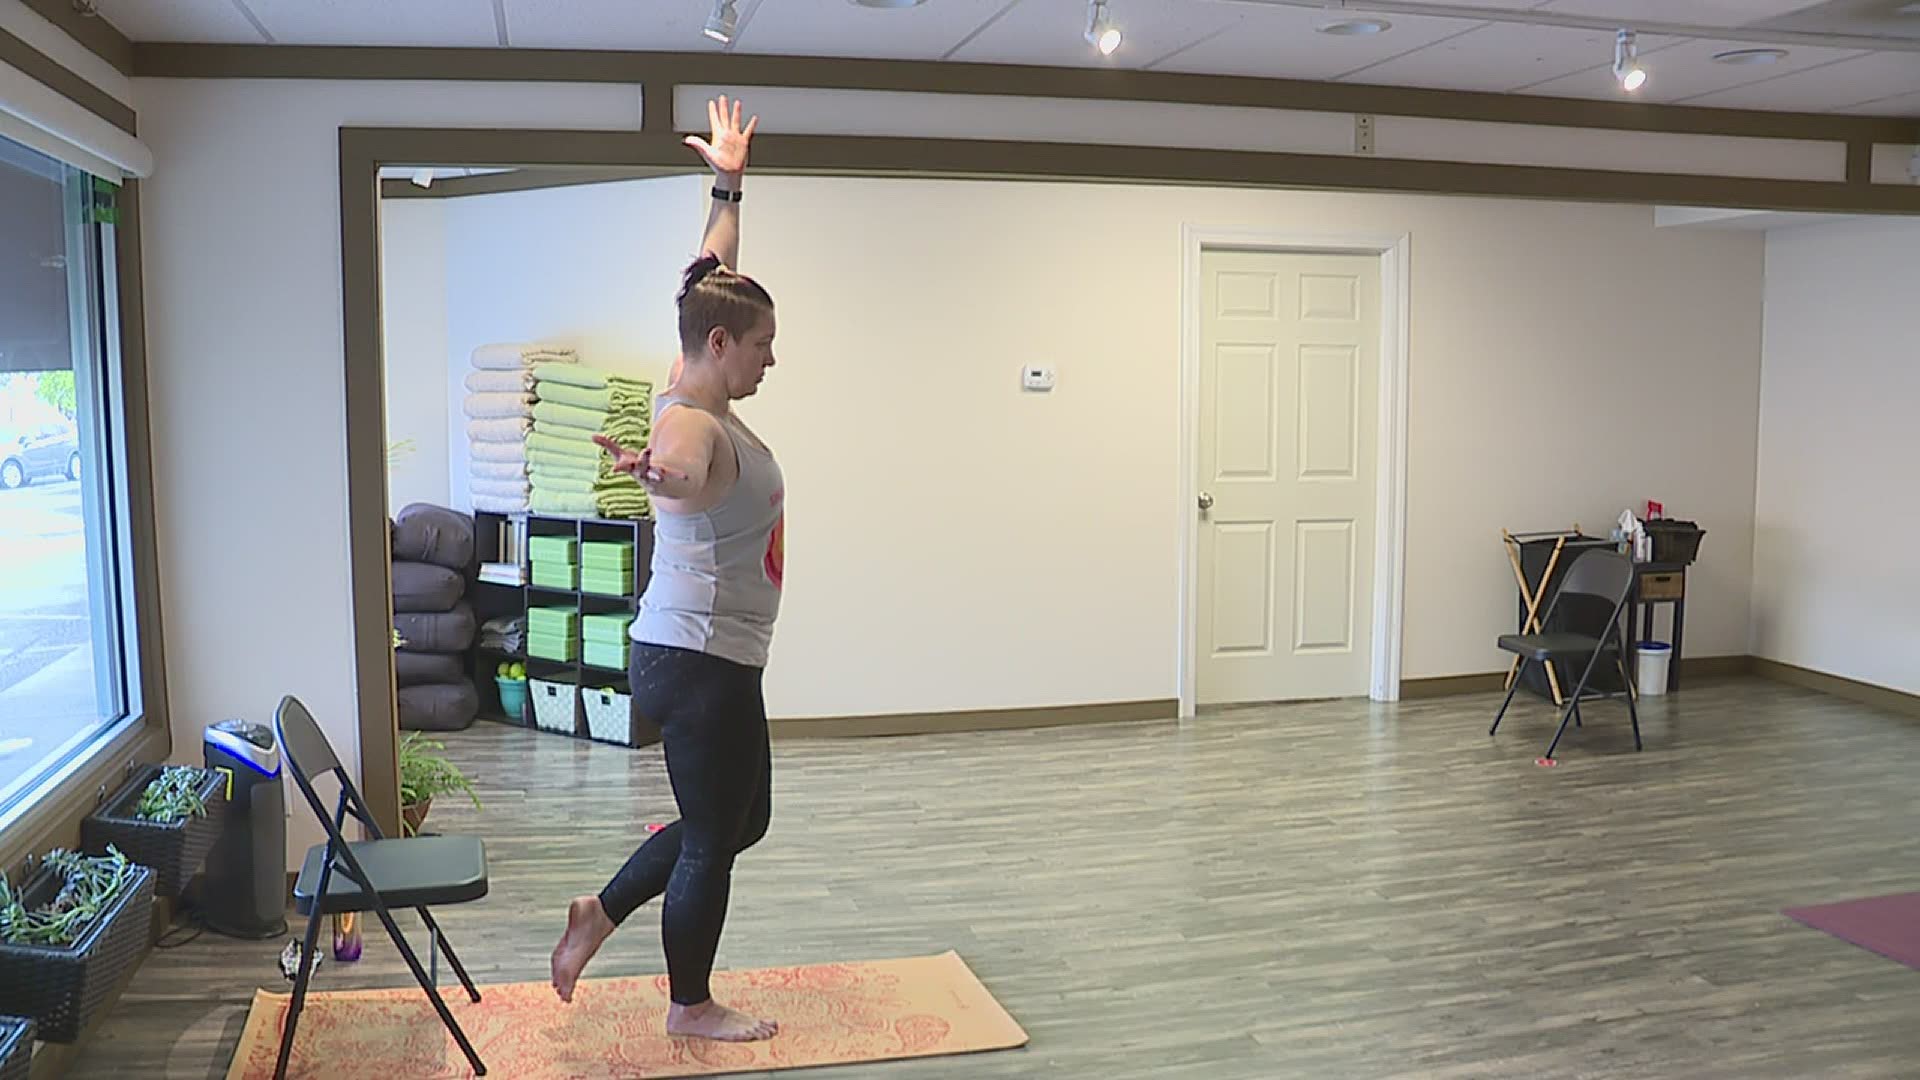 Sunlight Yoga Center in the Village of East Davenport says they're now offering a new type of class so people can be more comfortable.